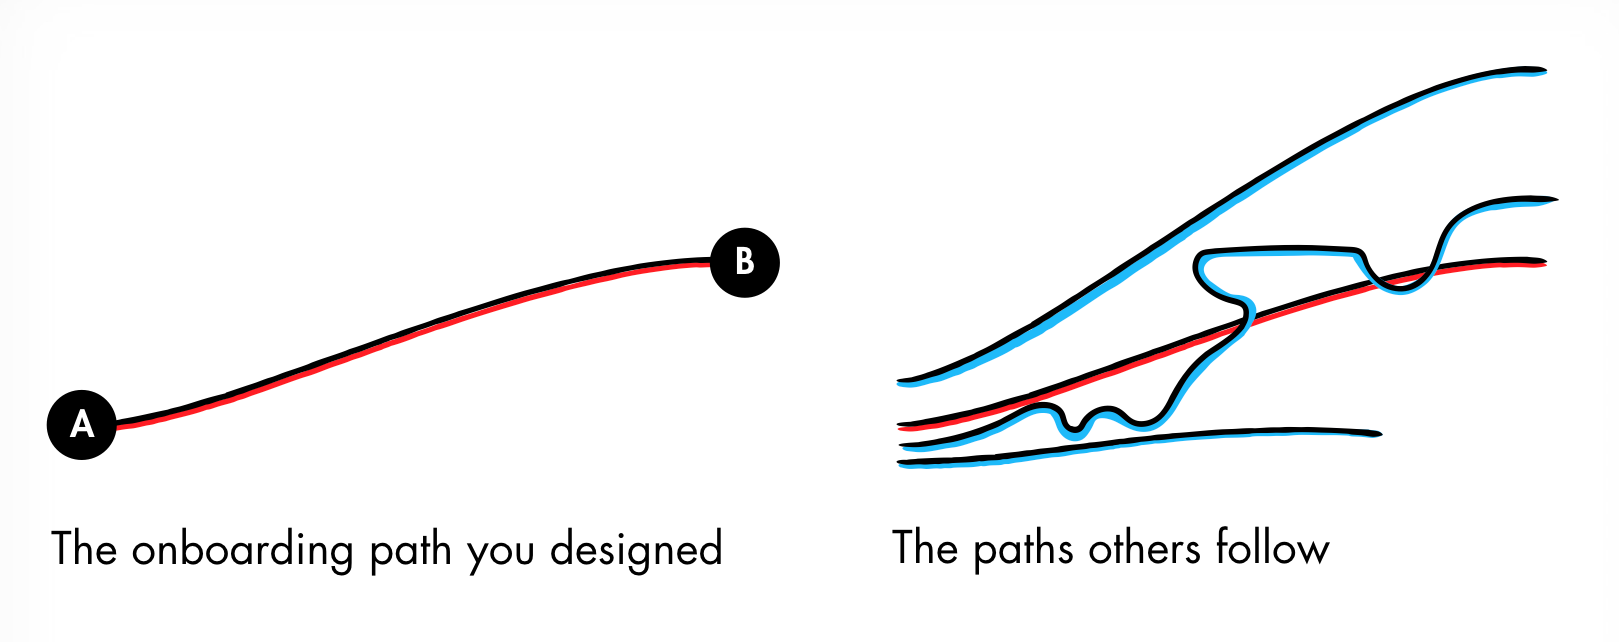 Illustration of varying onboarding paths